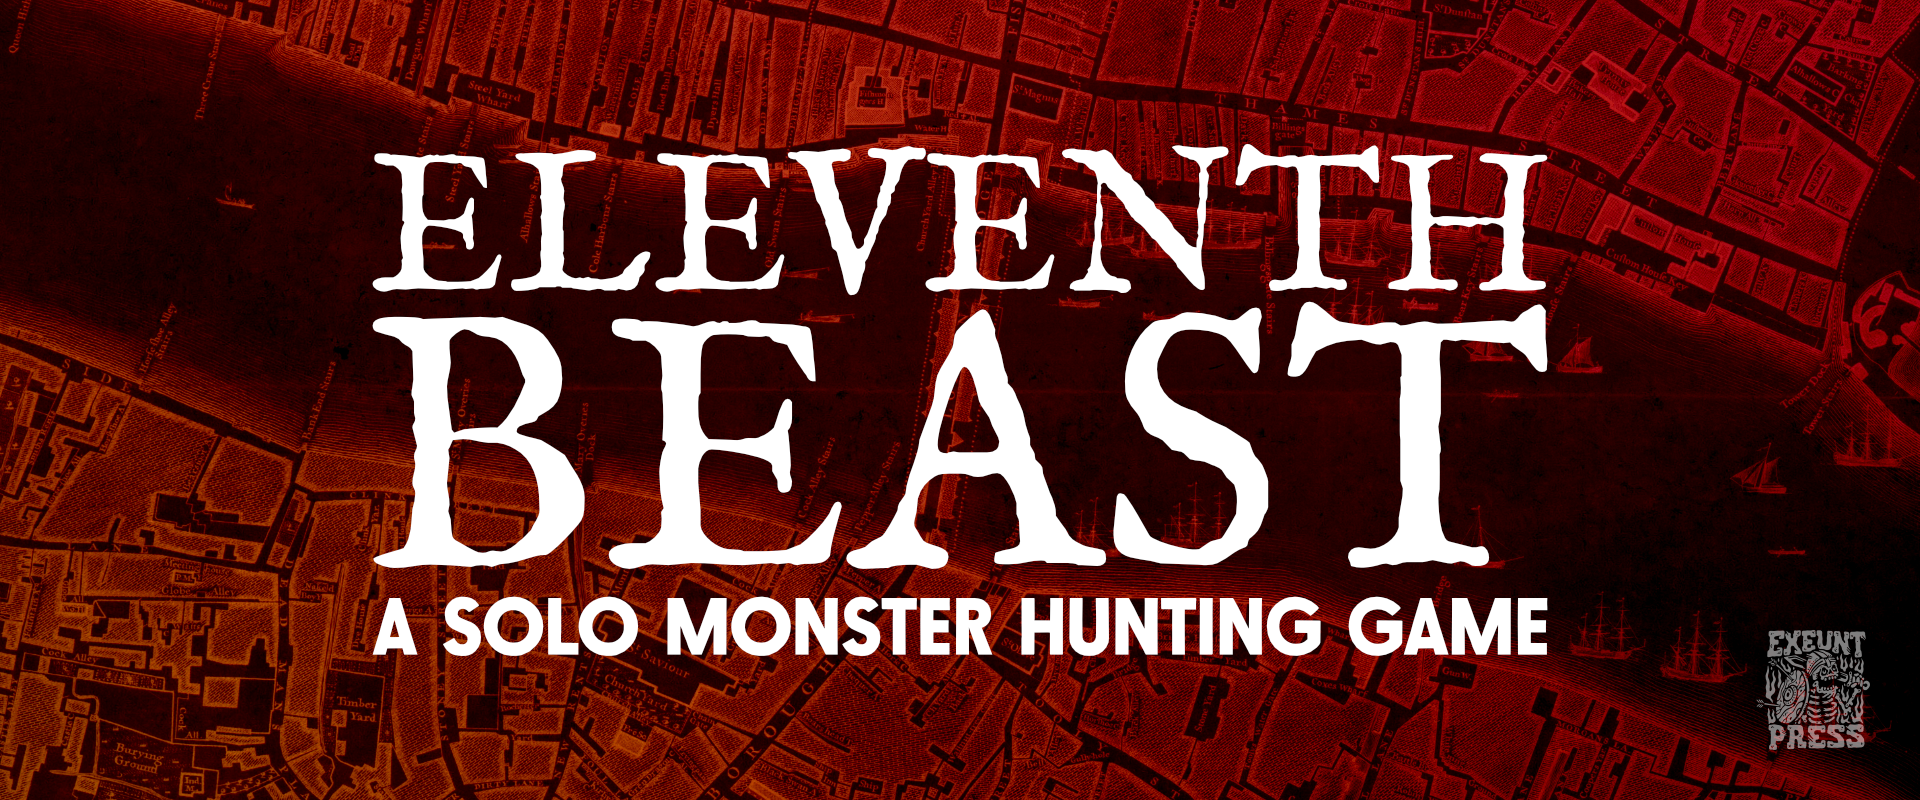 Eleventh Beast - A Solo Monster Hunting Game